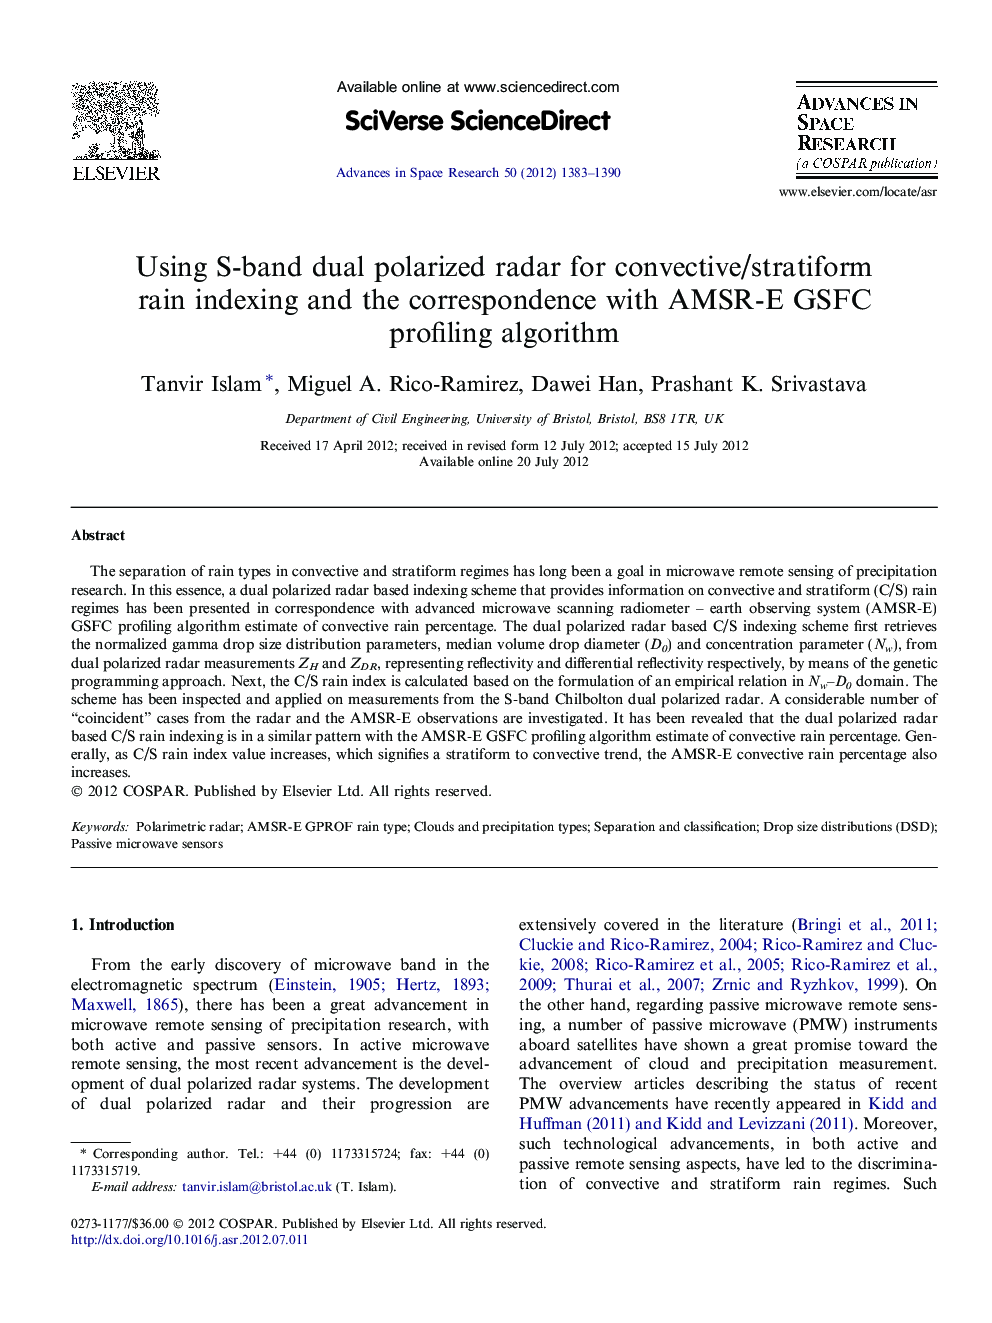 Using S-band dual polarized radar for convective/stratiform rain indexing and the correspondence with AMSR-E GSFC profiling algorithm